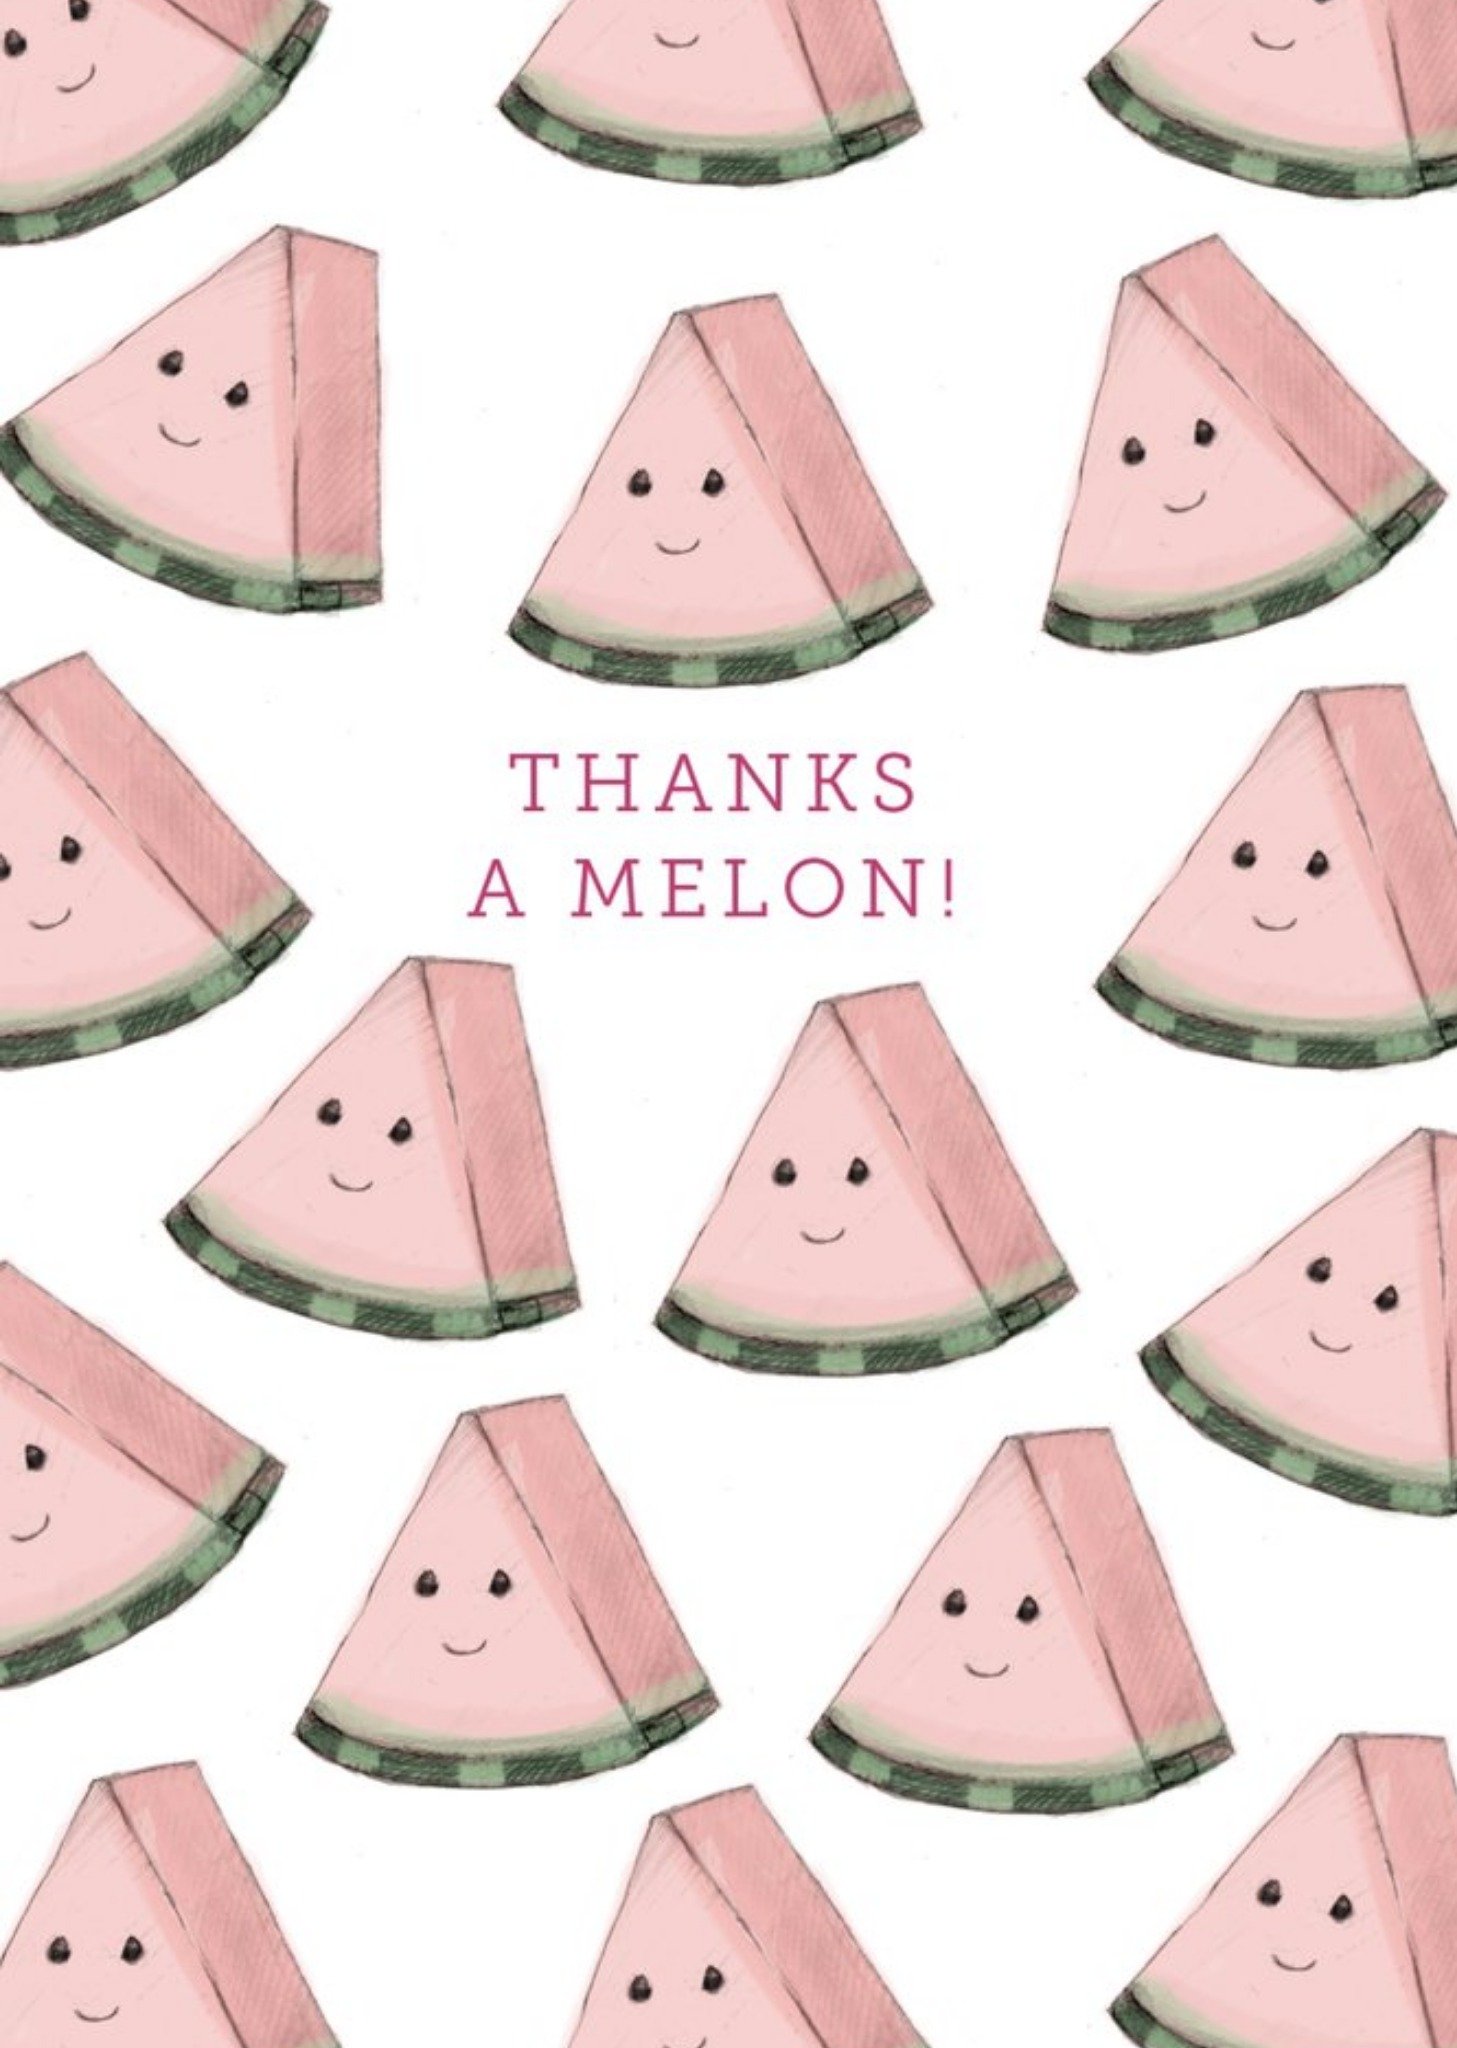 Moonpig Illustration Of Melon Slice Characters Funny Pun Thank You Card Ecard